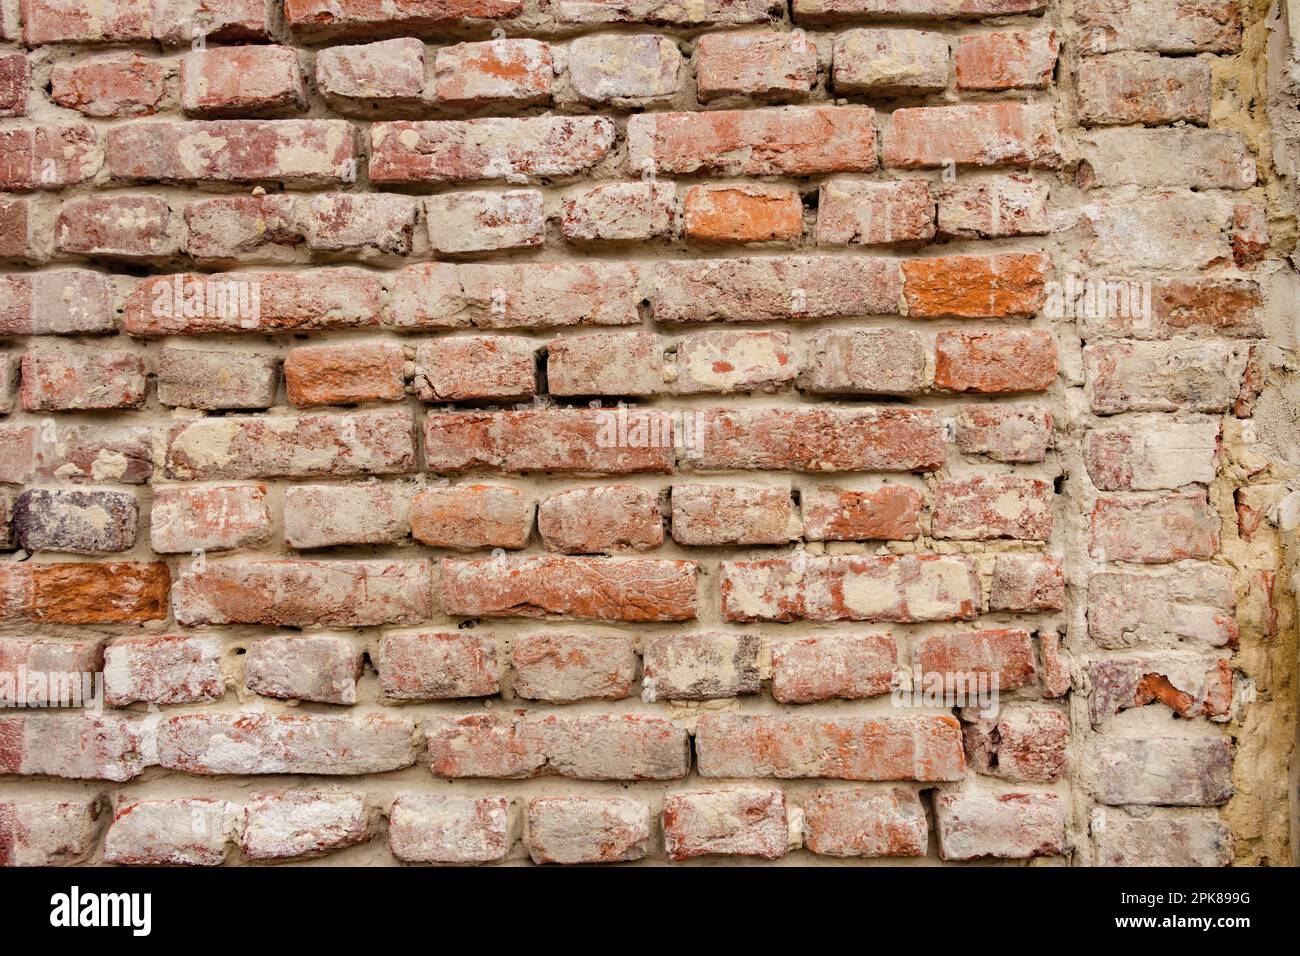 Texture of a brick wall. Old orange brick textured masonry. Volumetric image, realistic and high-quality photo for web design and background Stock Photo